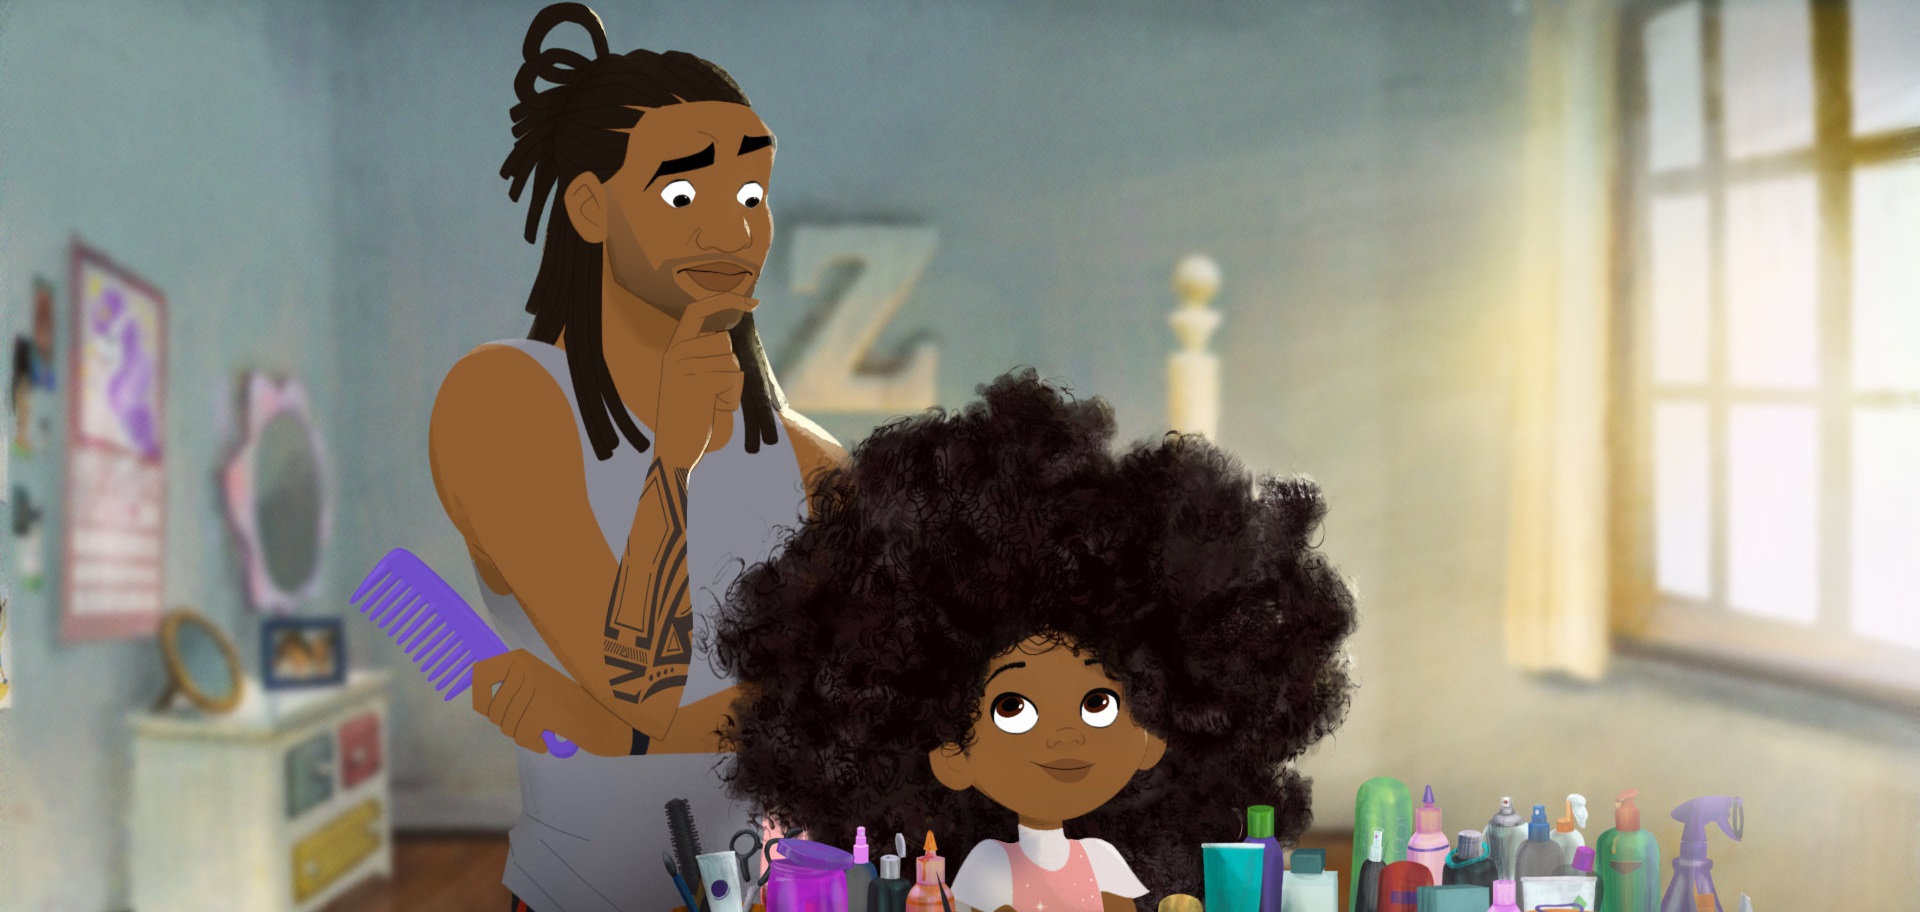 In Case You Missed: Watch The Oscar Winning Short Animated Film – ‘Hair Love’